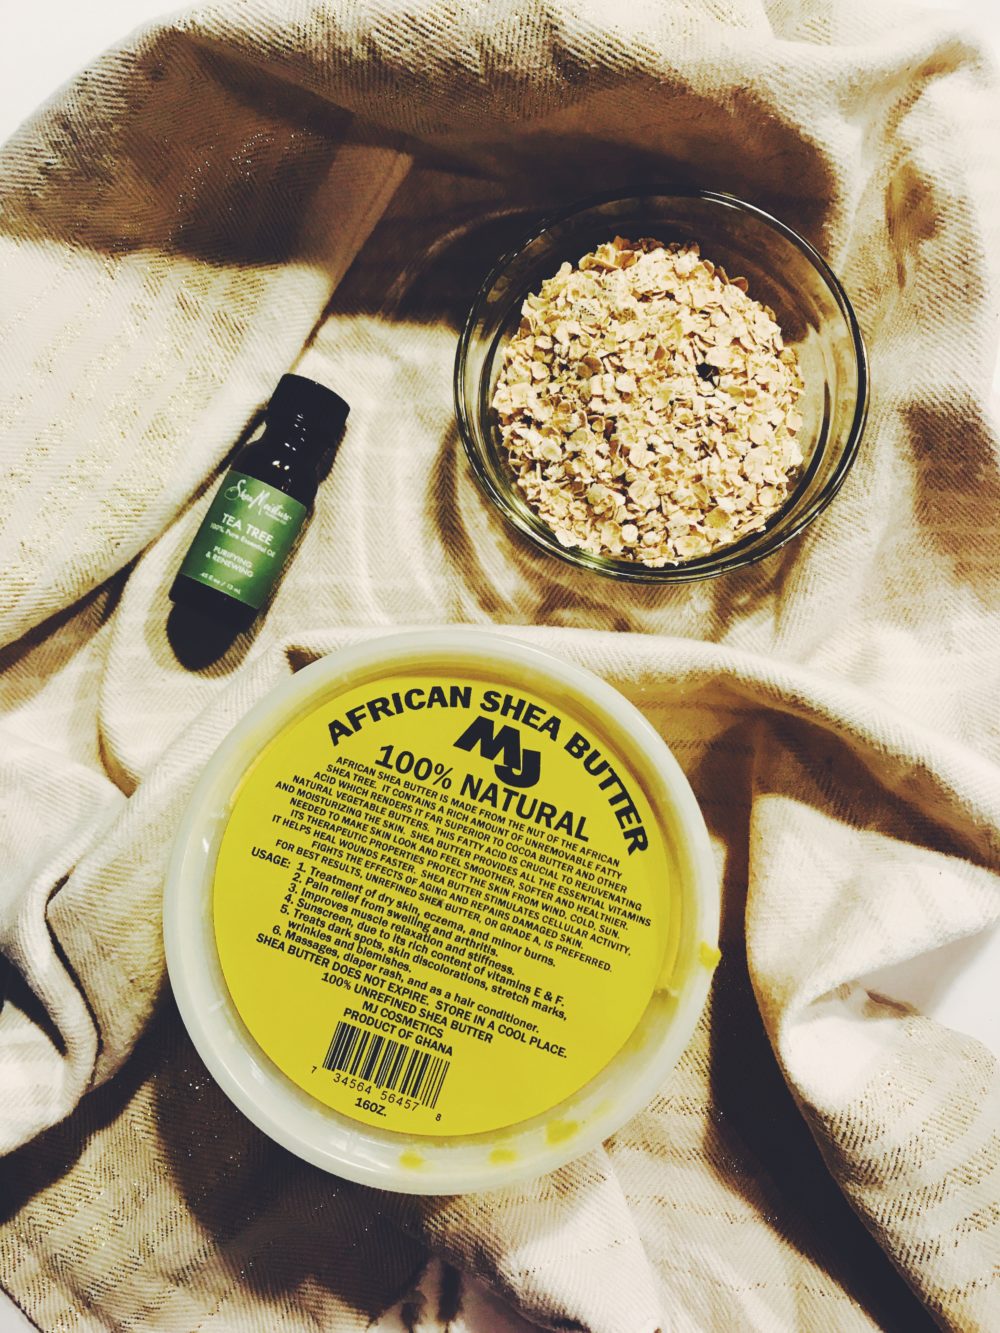 Restore Your Smooth, Beautiful Skin With This Healing DIY Eczema Cream